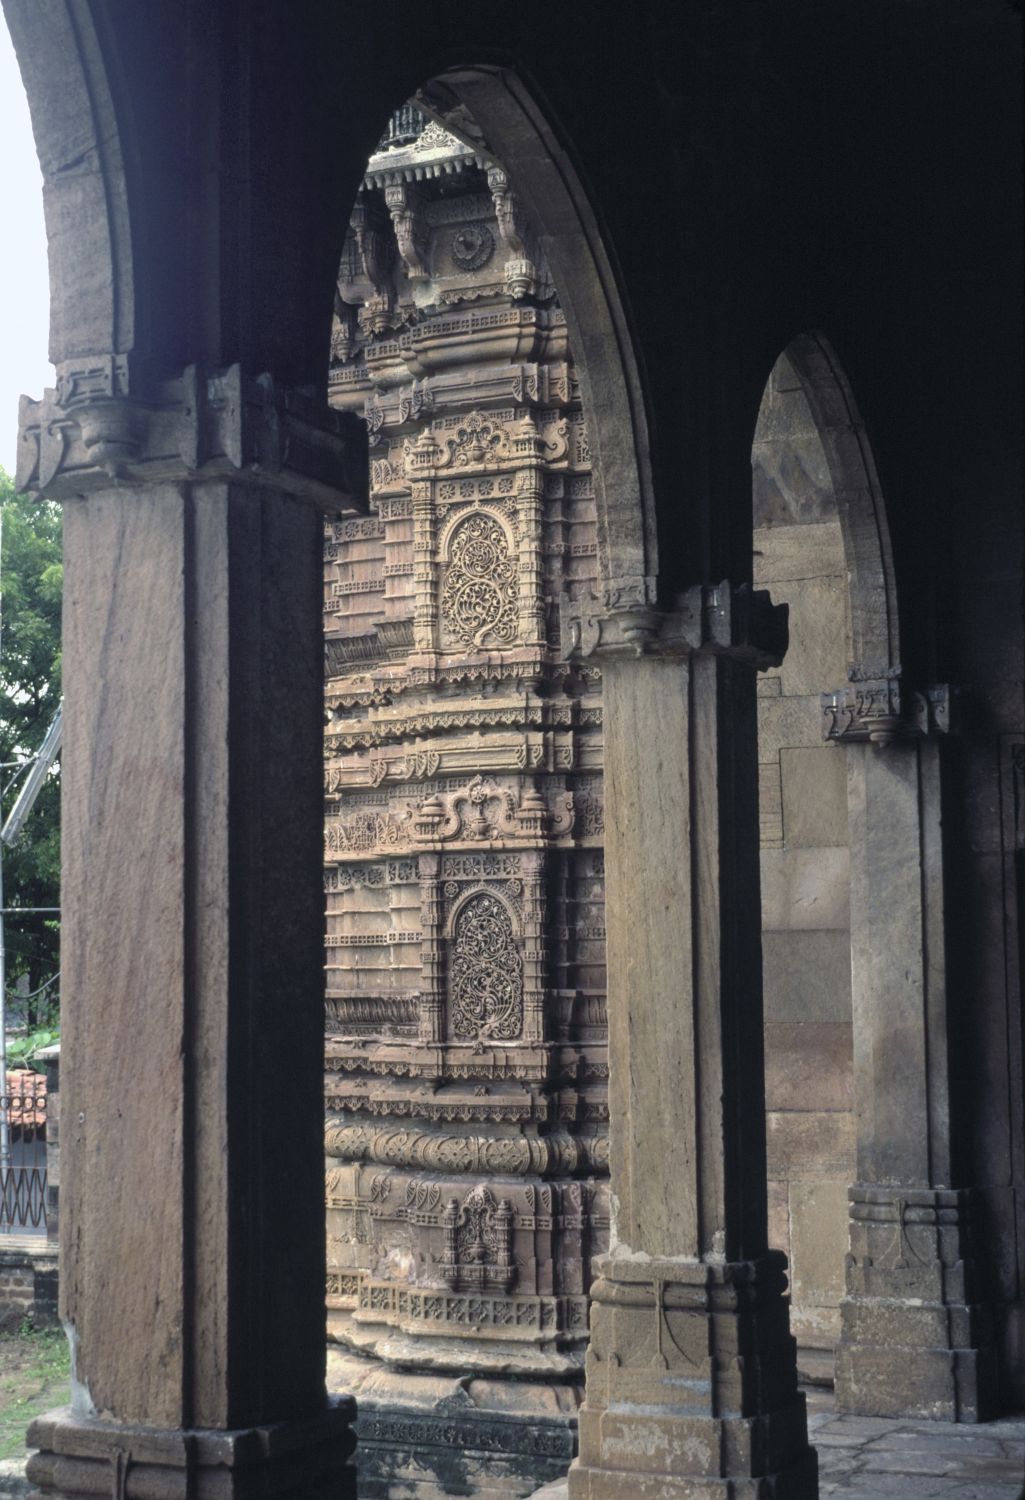 View from inside prayer hall out through front arcade. The buttress on the south end of the facade is visible.